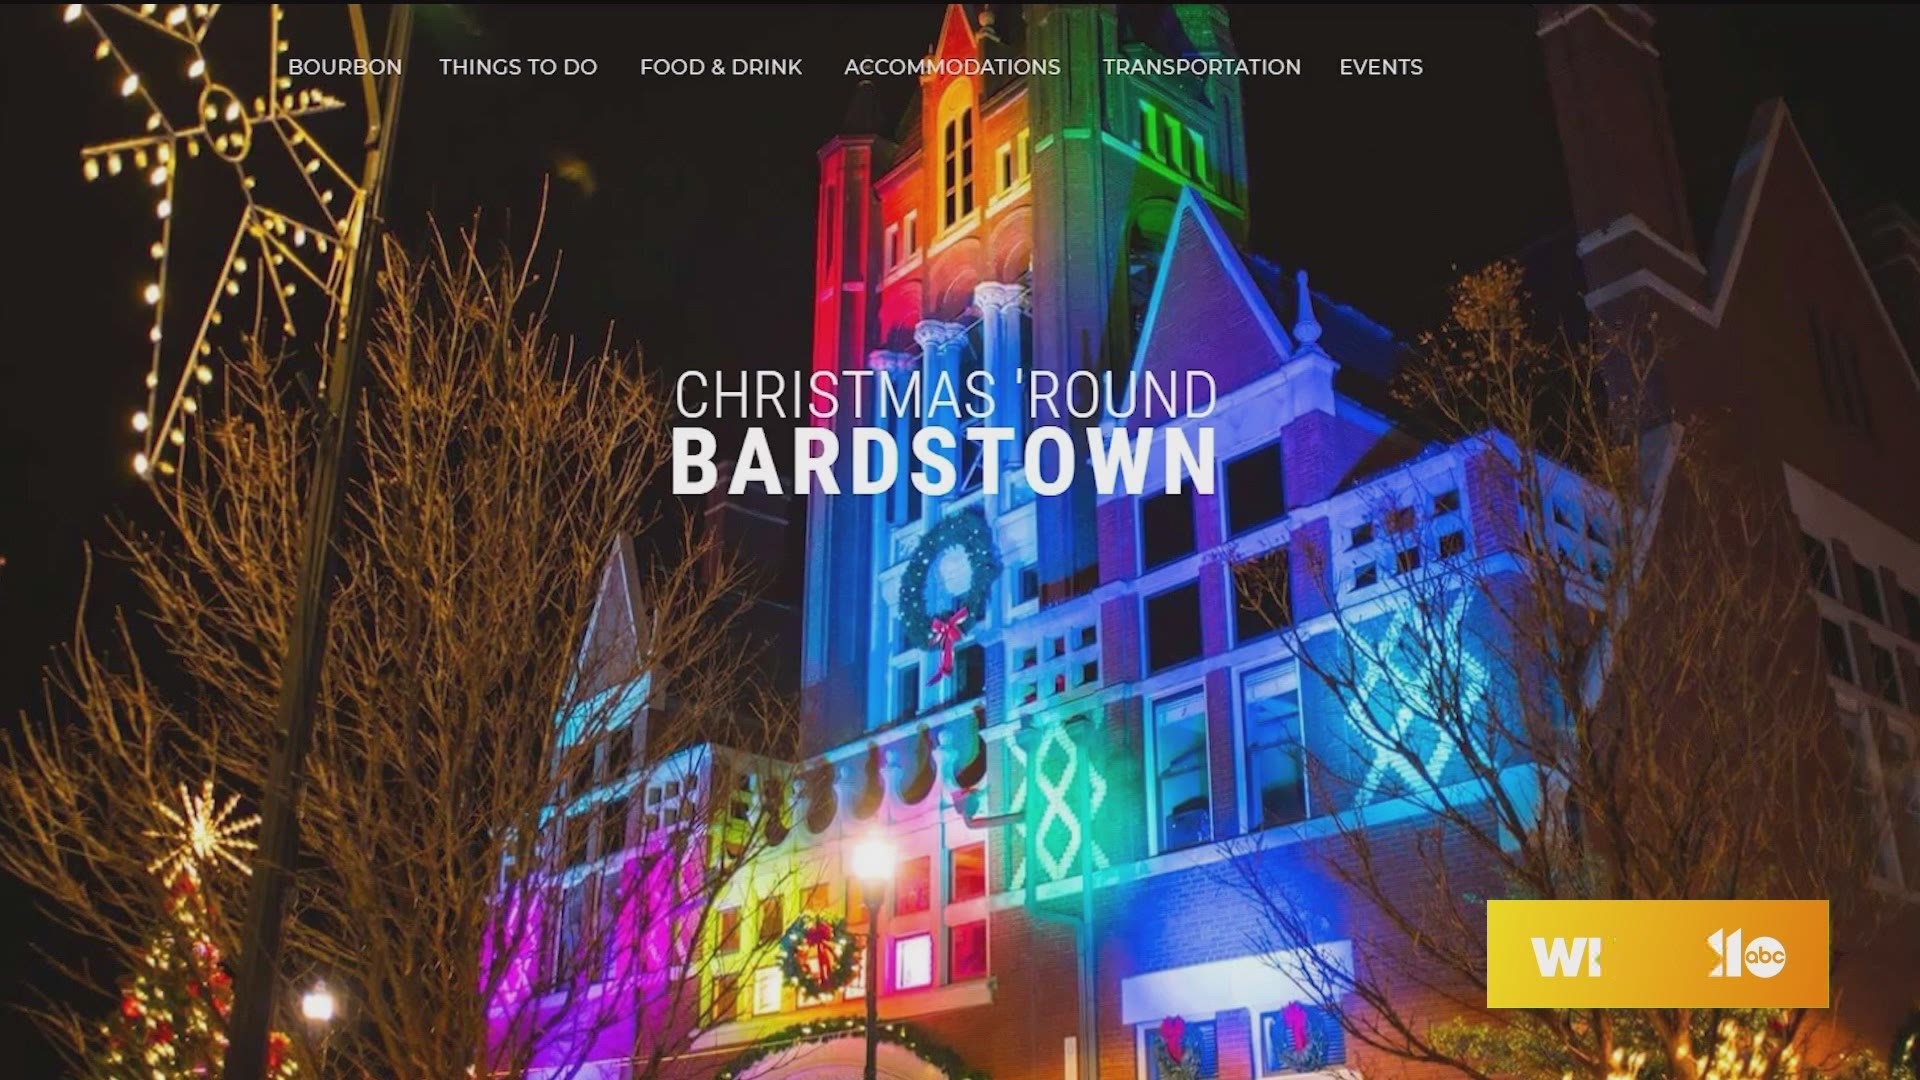 For more information, head to VisitBardstown.com/Christmas.